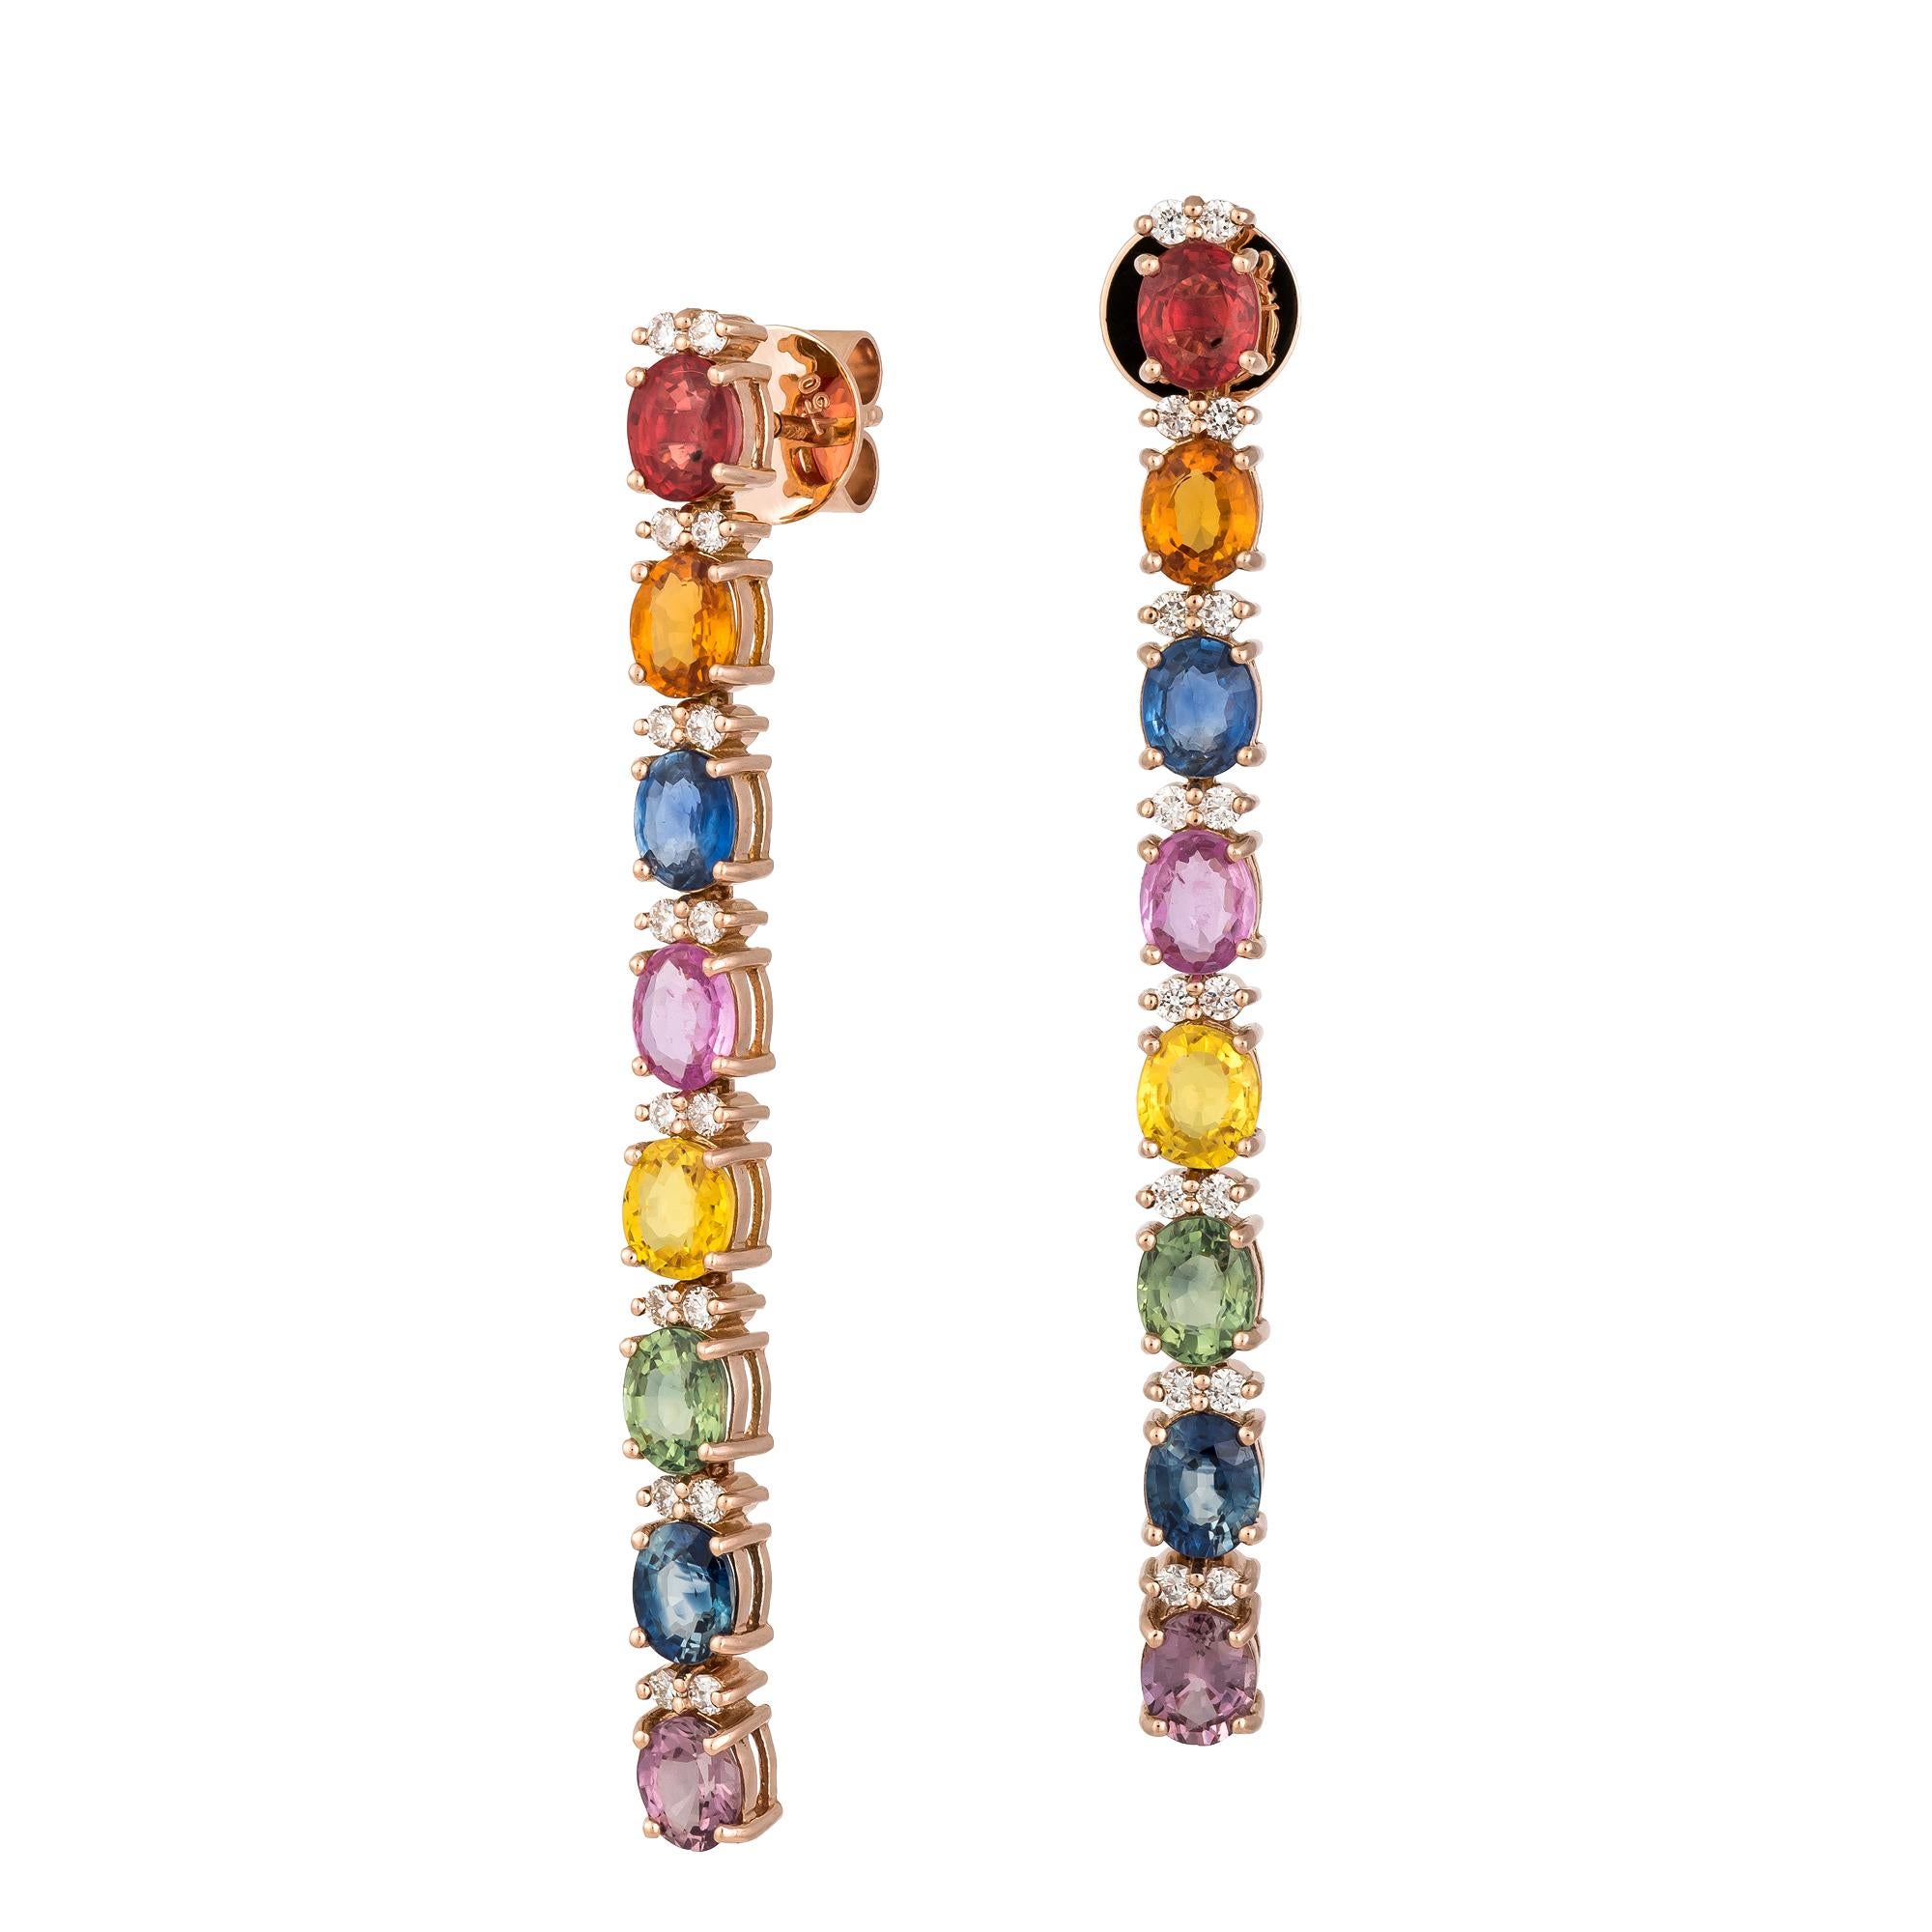 EARRING 18K Rose Gold Diamond 0.45 Cts/32 Pieces, Multi Sapphire 6.64 Cts/16 Pieces
